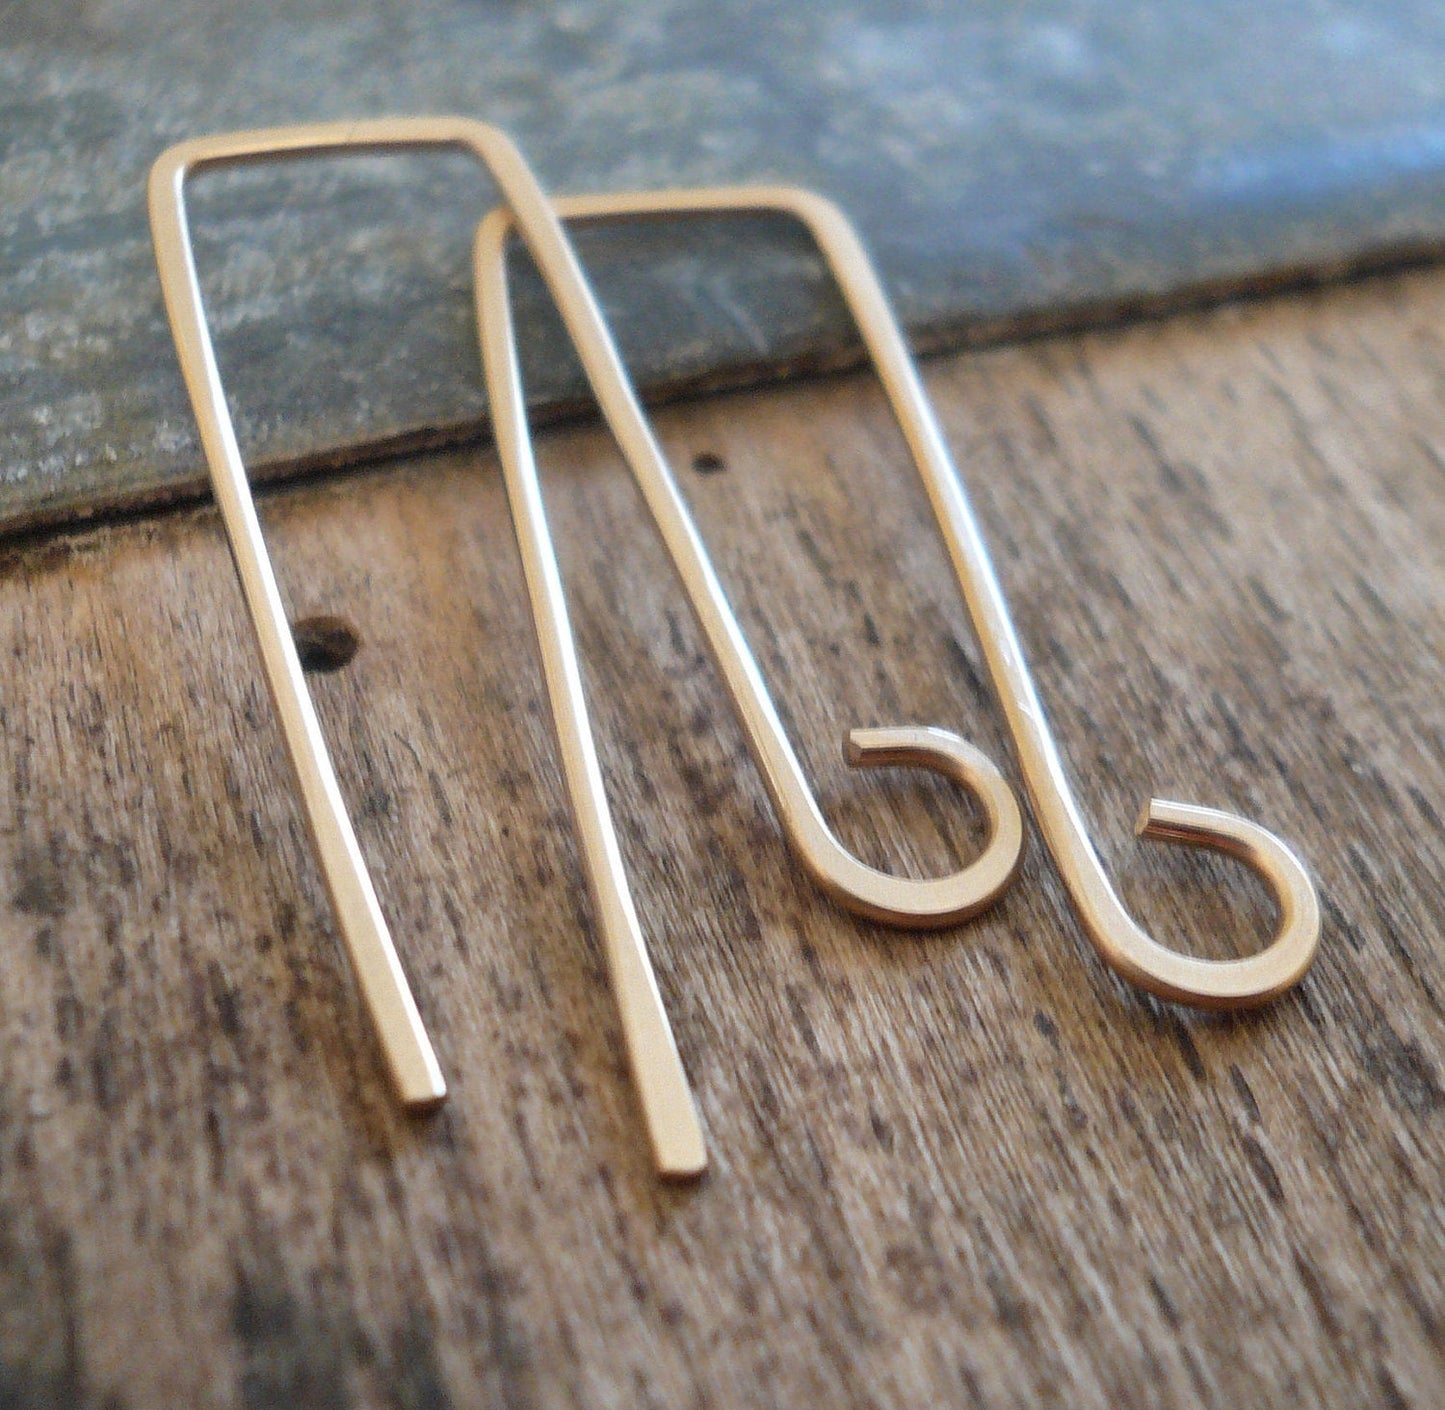 Millstone 14kt Goldfill Earwires - Yellow or Rose Goldfill. Handmade. Handforged